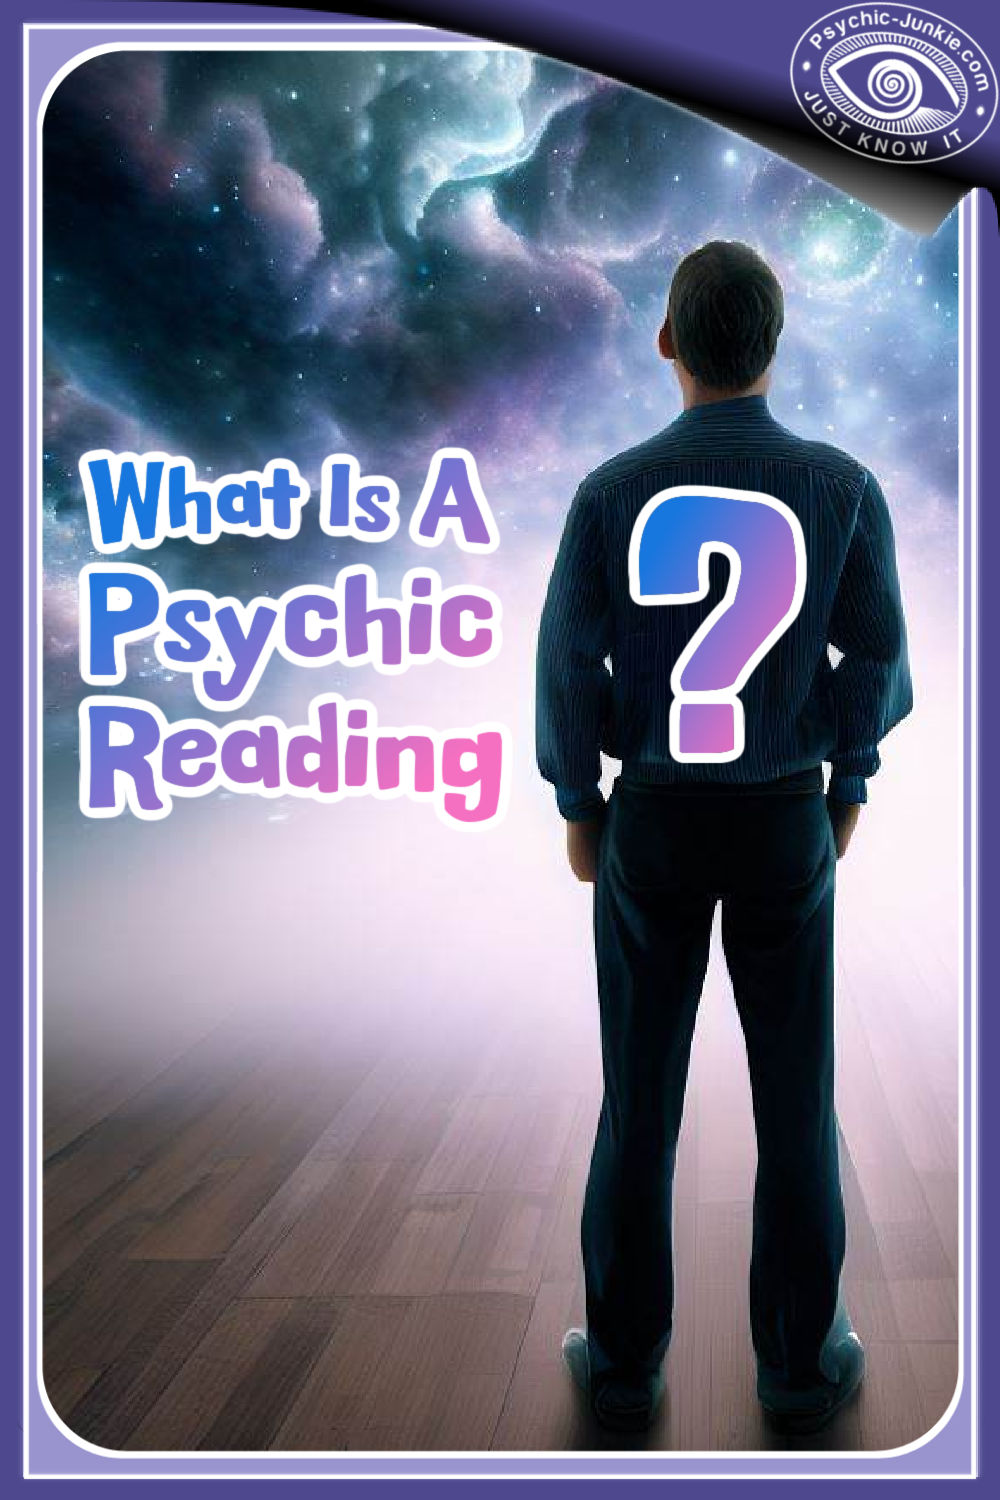 What is a psychic reading?